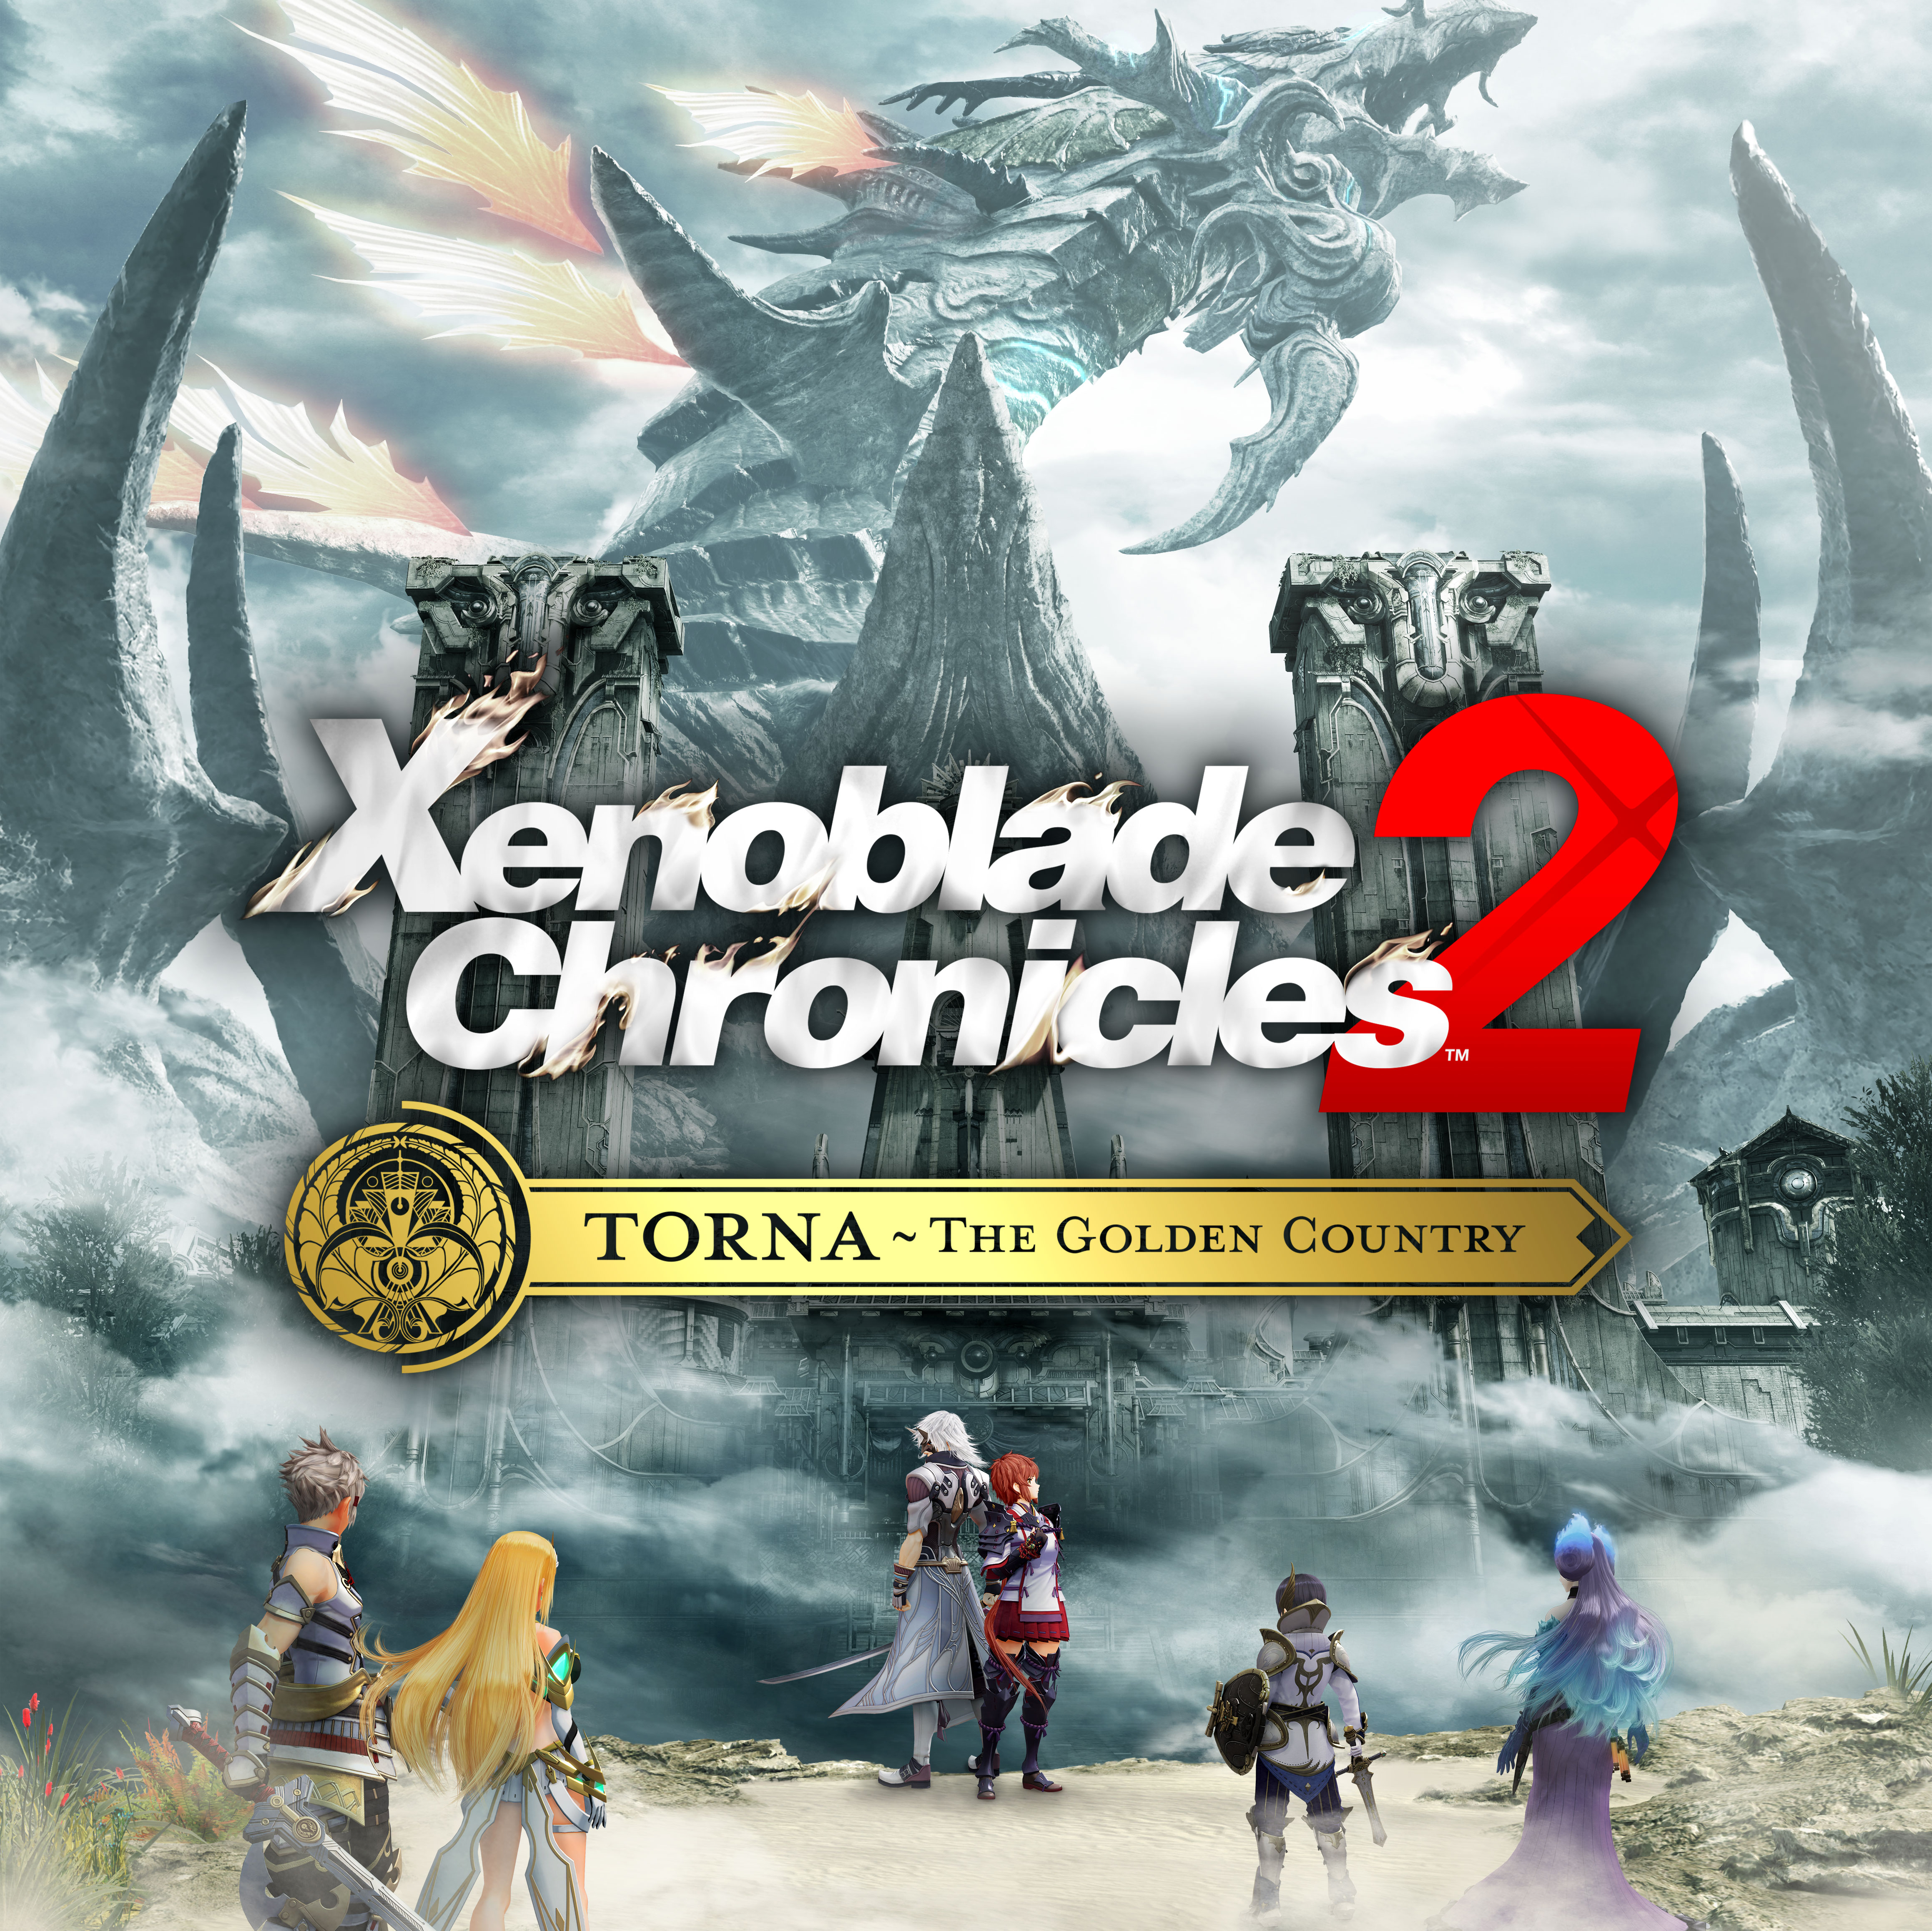 xenoblade chronicles torna the golden country download free